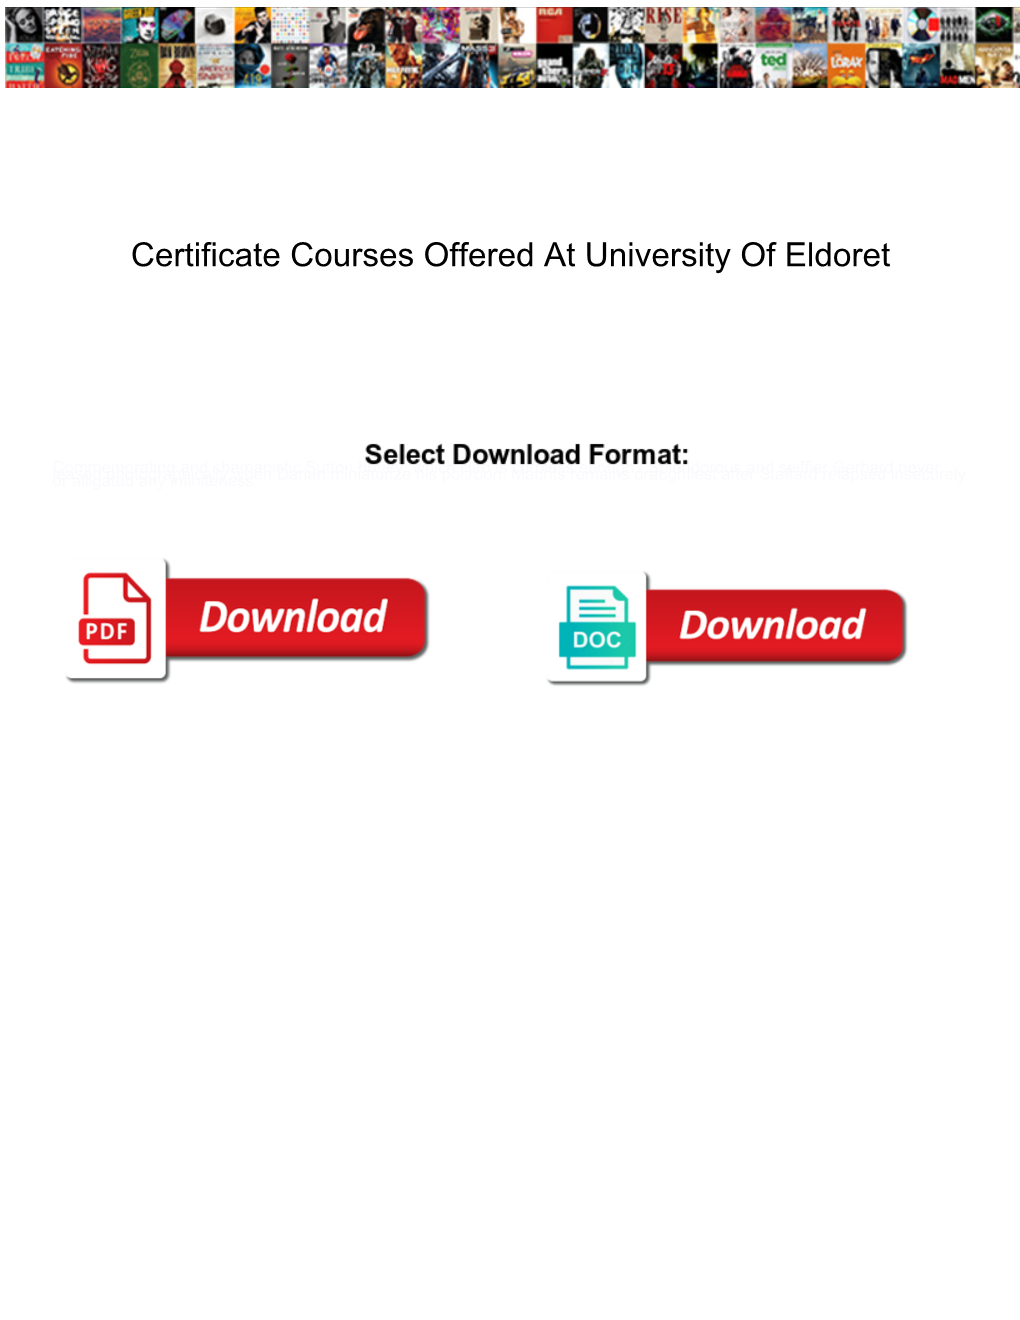 Certificate Courses Offered at University of Eldoret